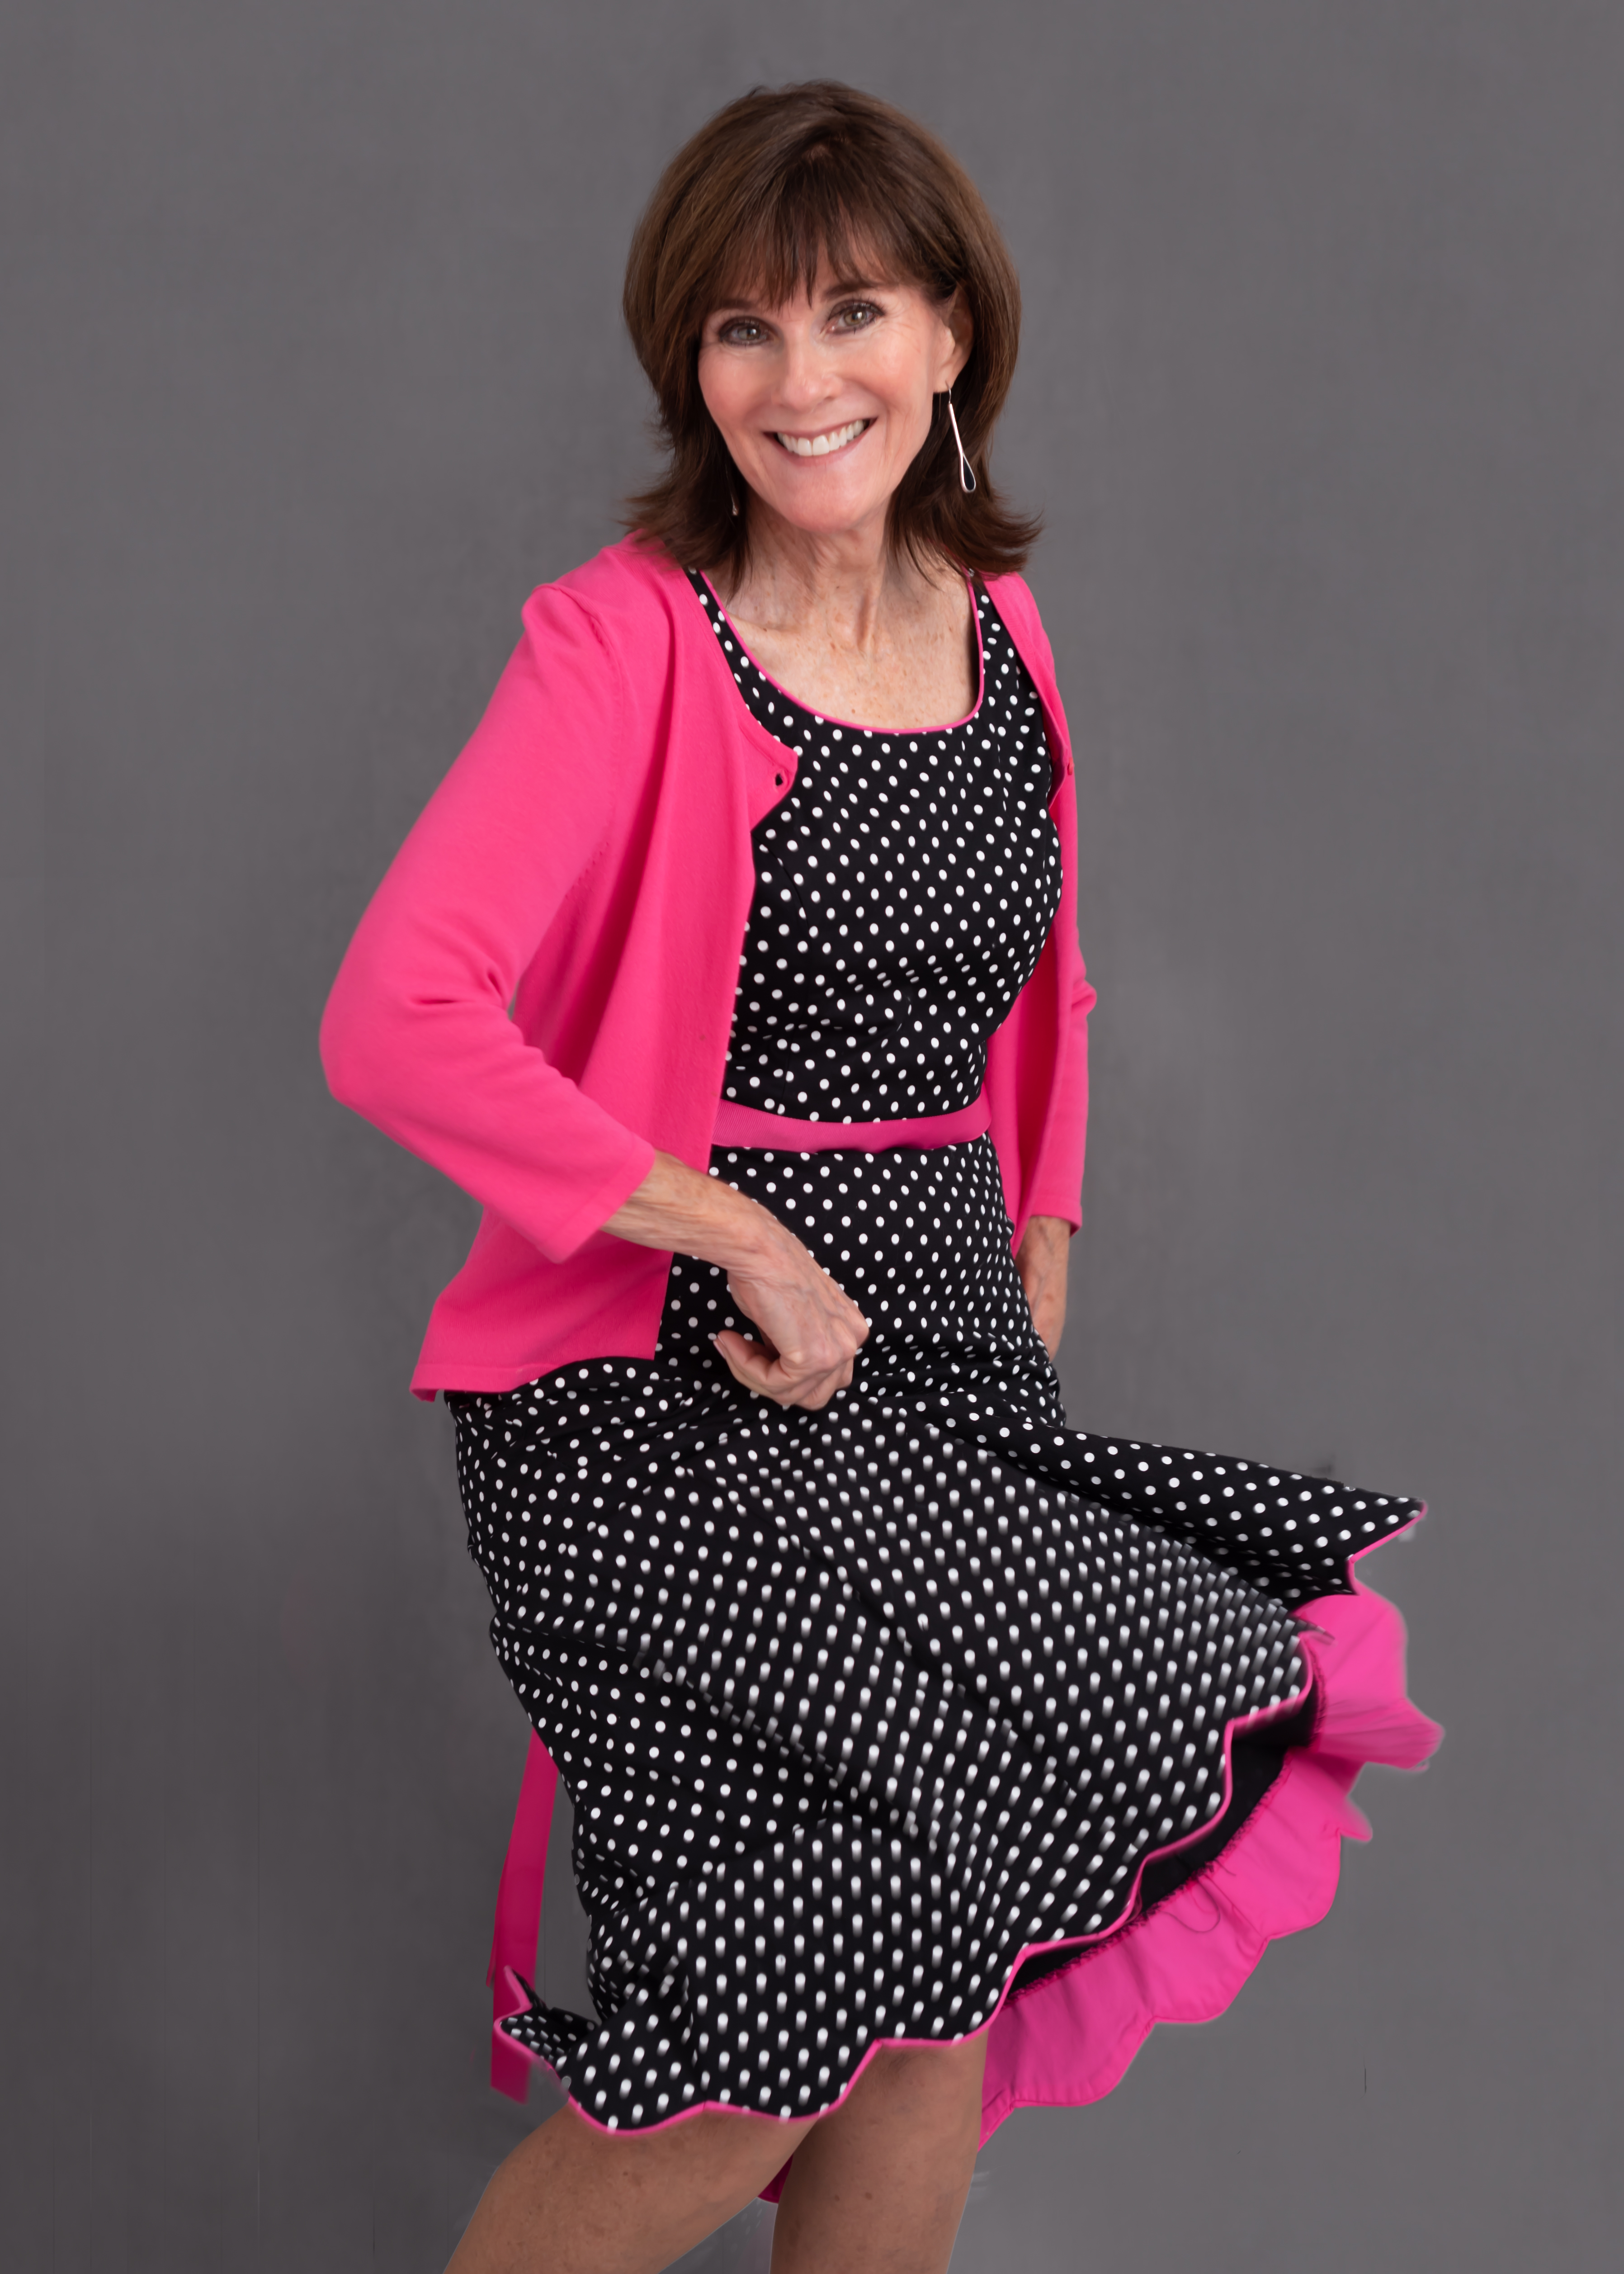 Coach Bernadette smiling in a black-and-white polka dot dress with a pink cardigan.